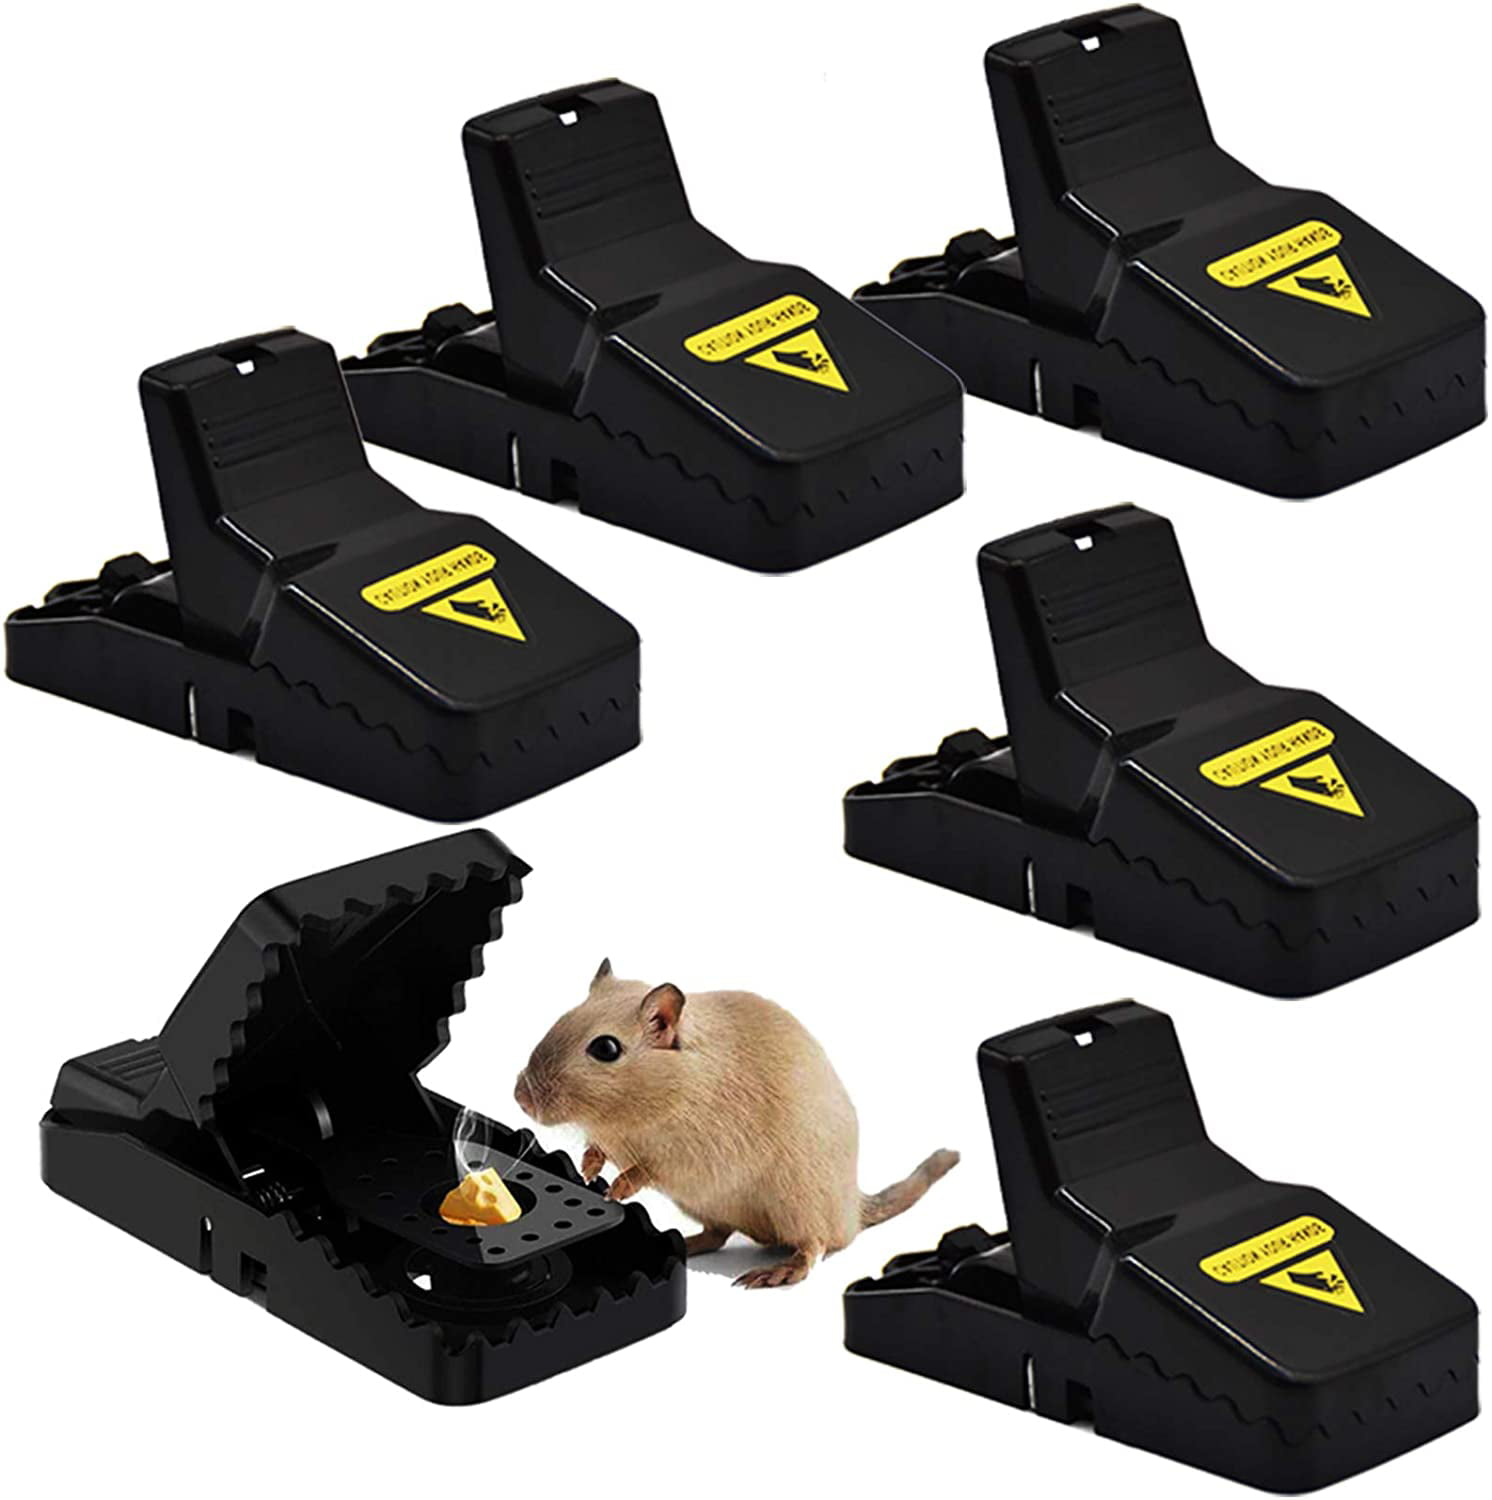 Reusable Rat Trap Catching Mice Mouse Spring Rodent Trap-Easy Catc I2 